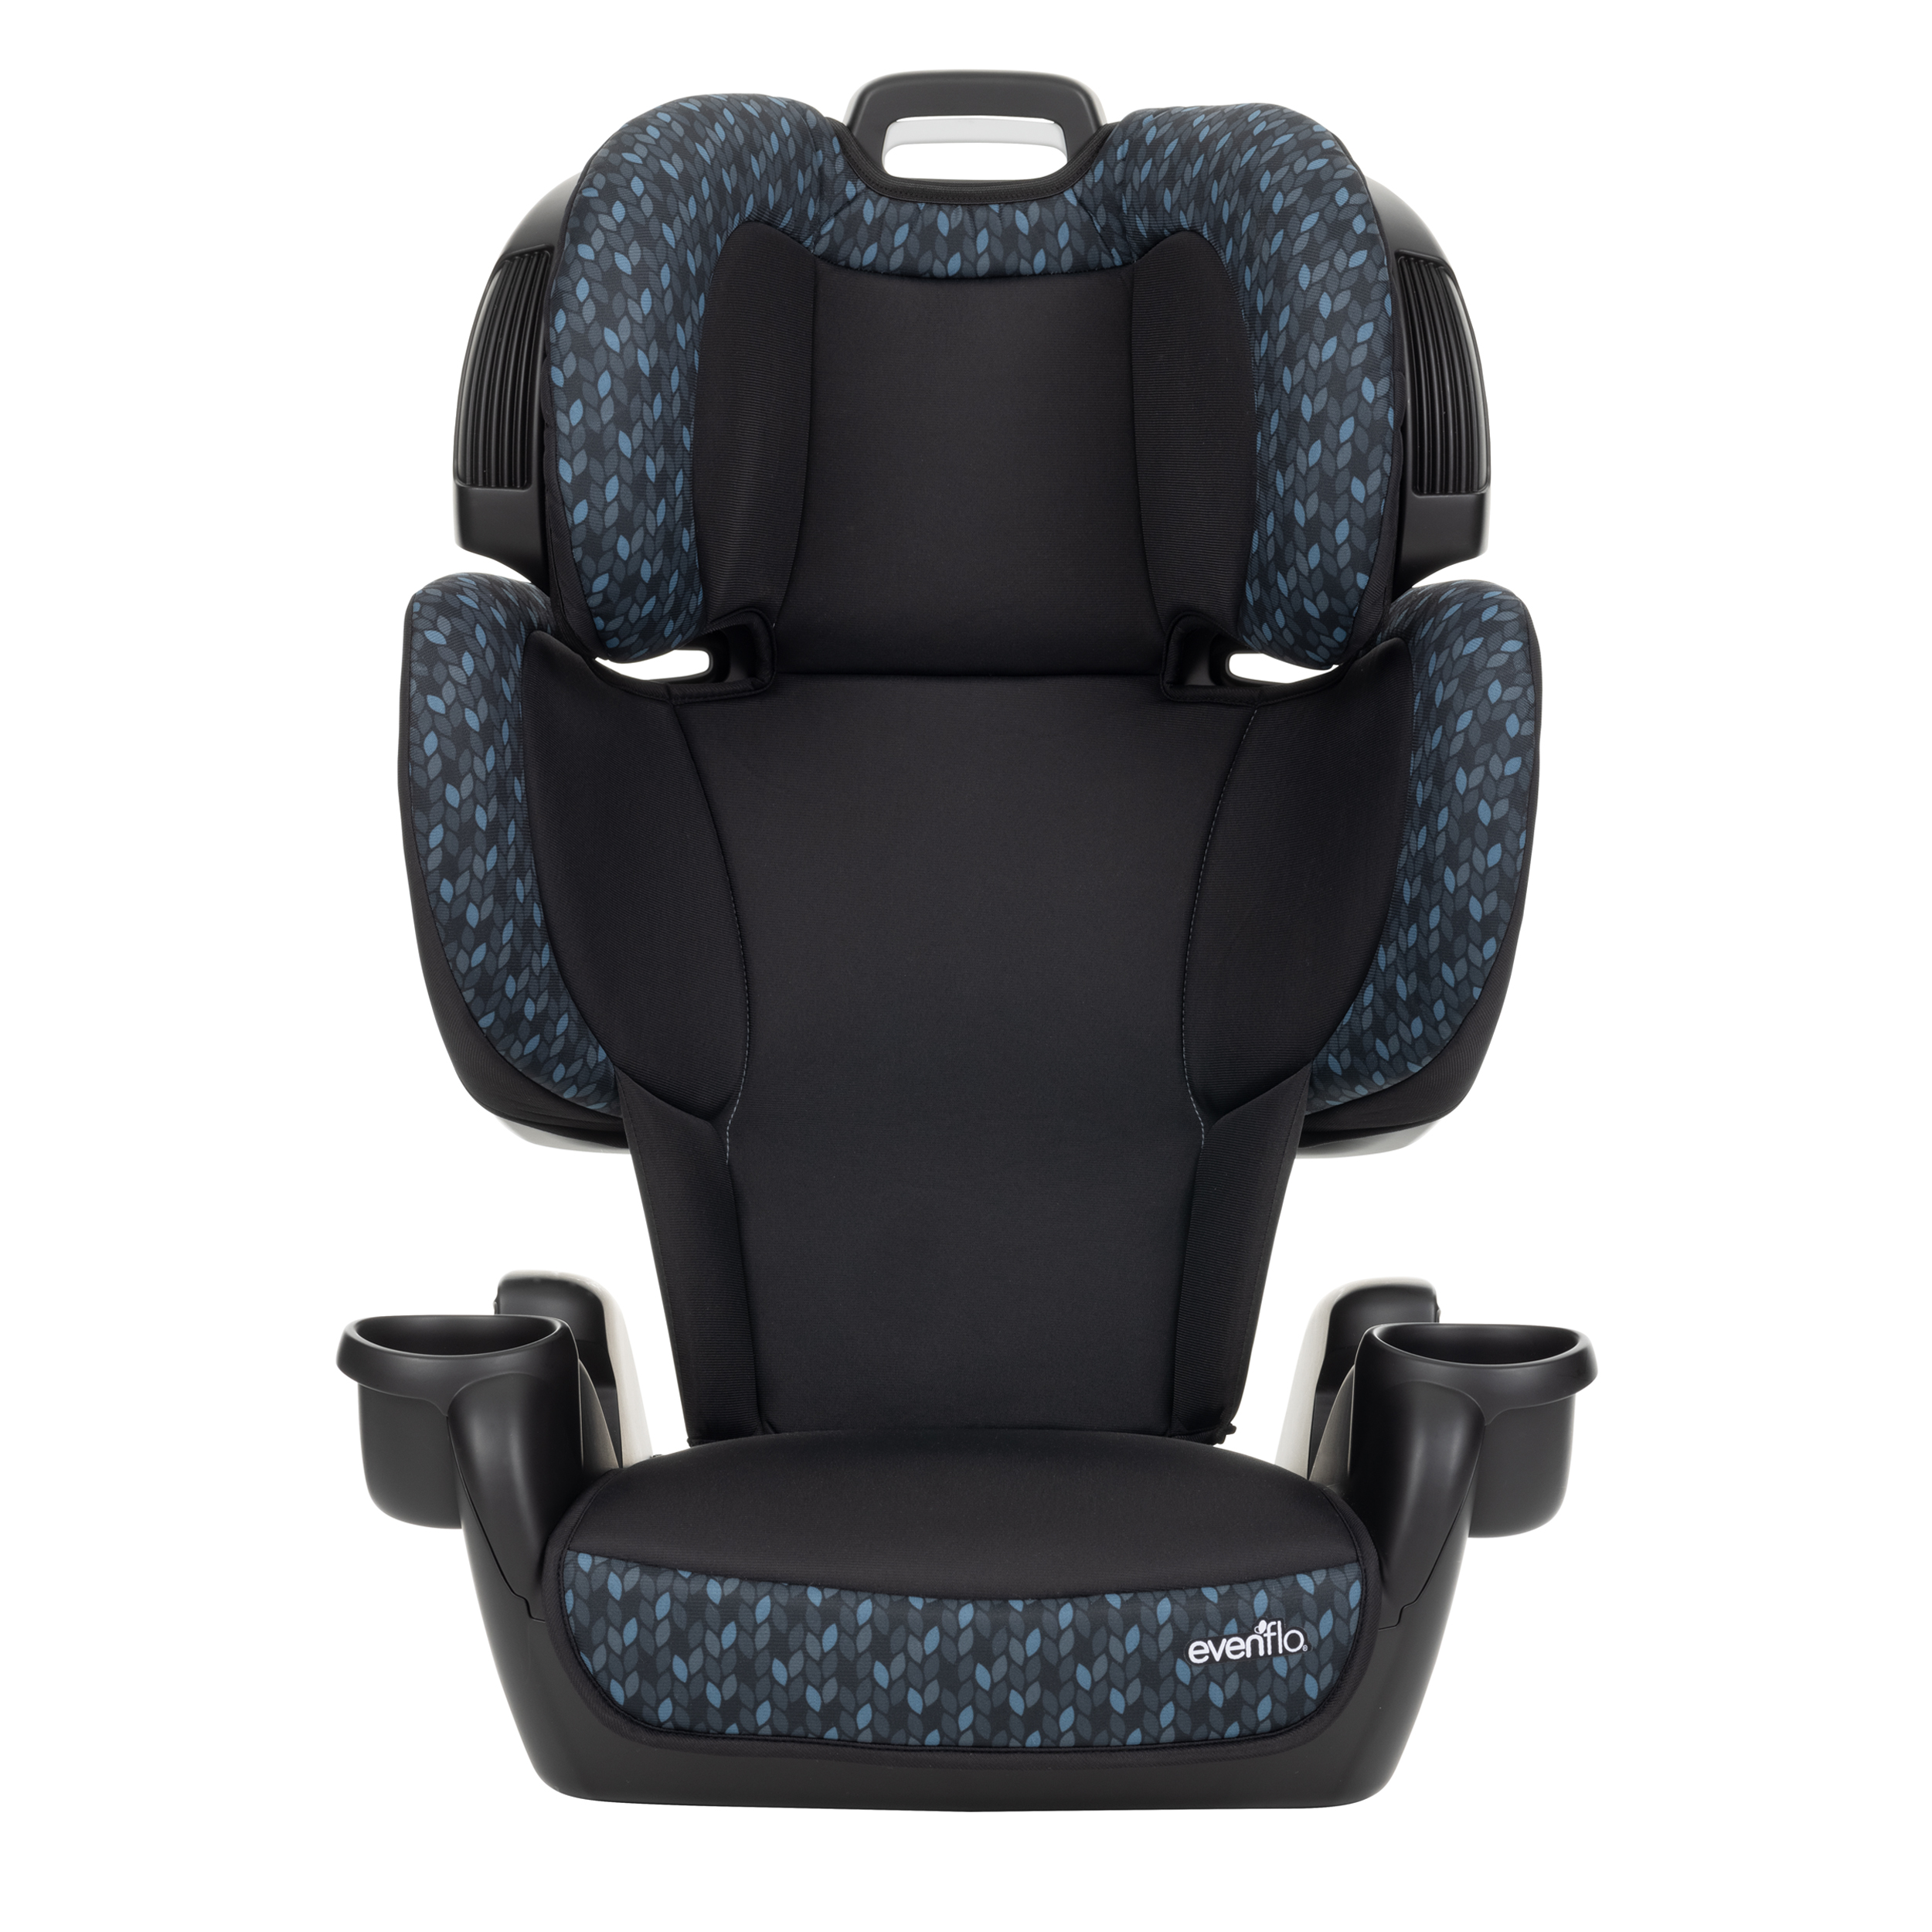 Evenflo GoTime LX Booster Car Seat (Quincy Blue), 4 Years + - image 1 of 12